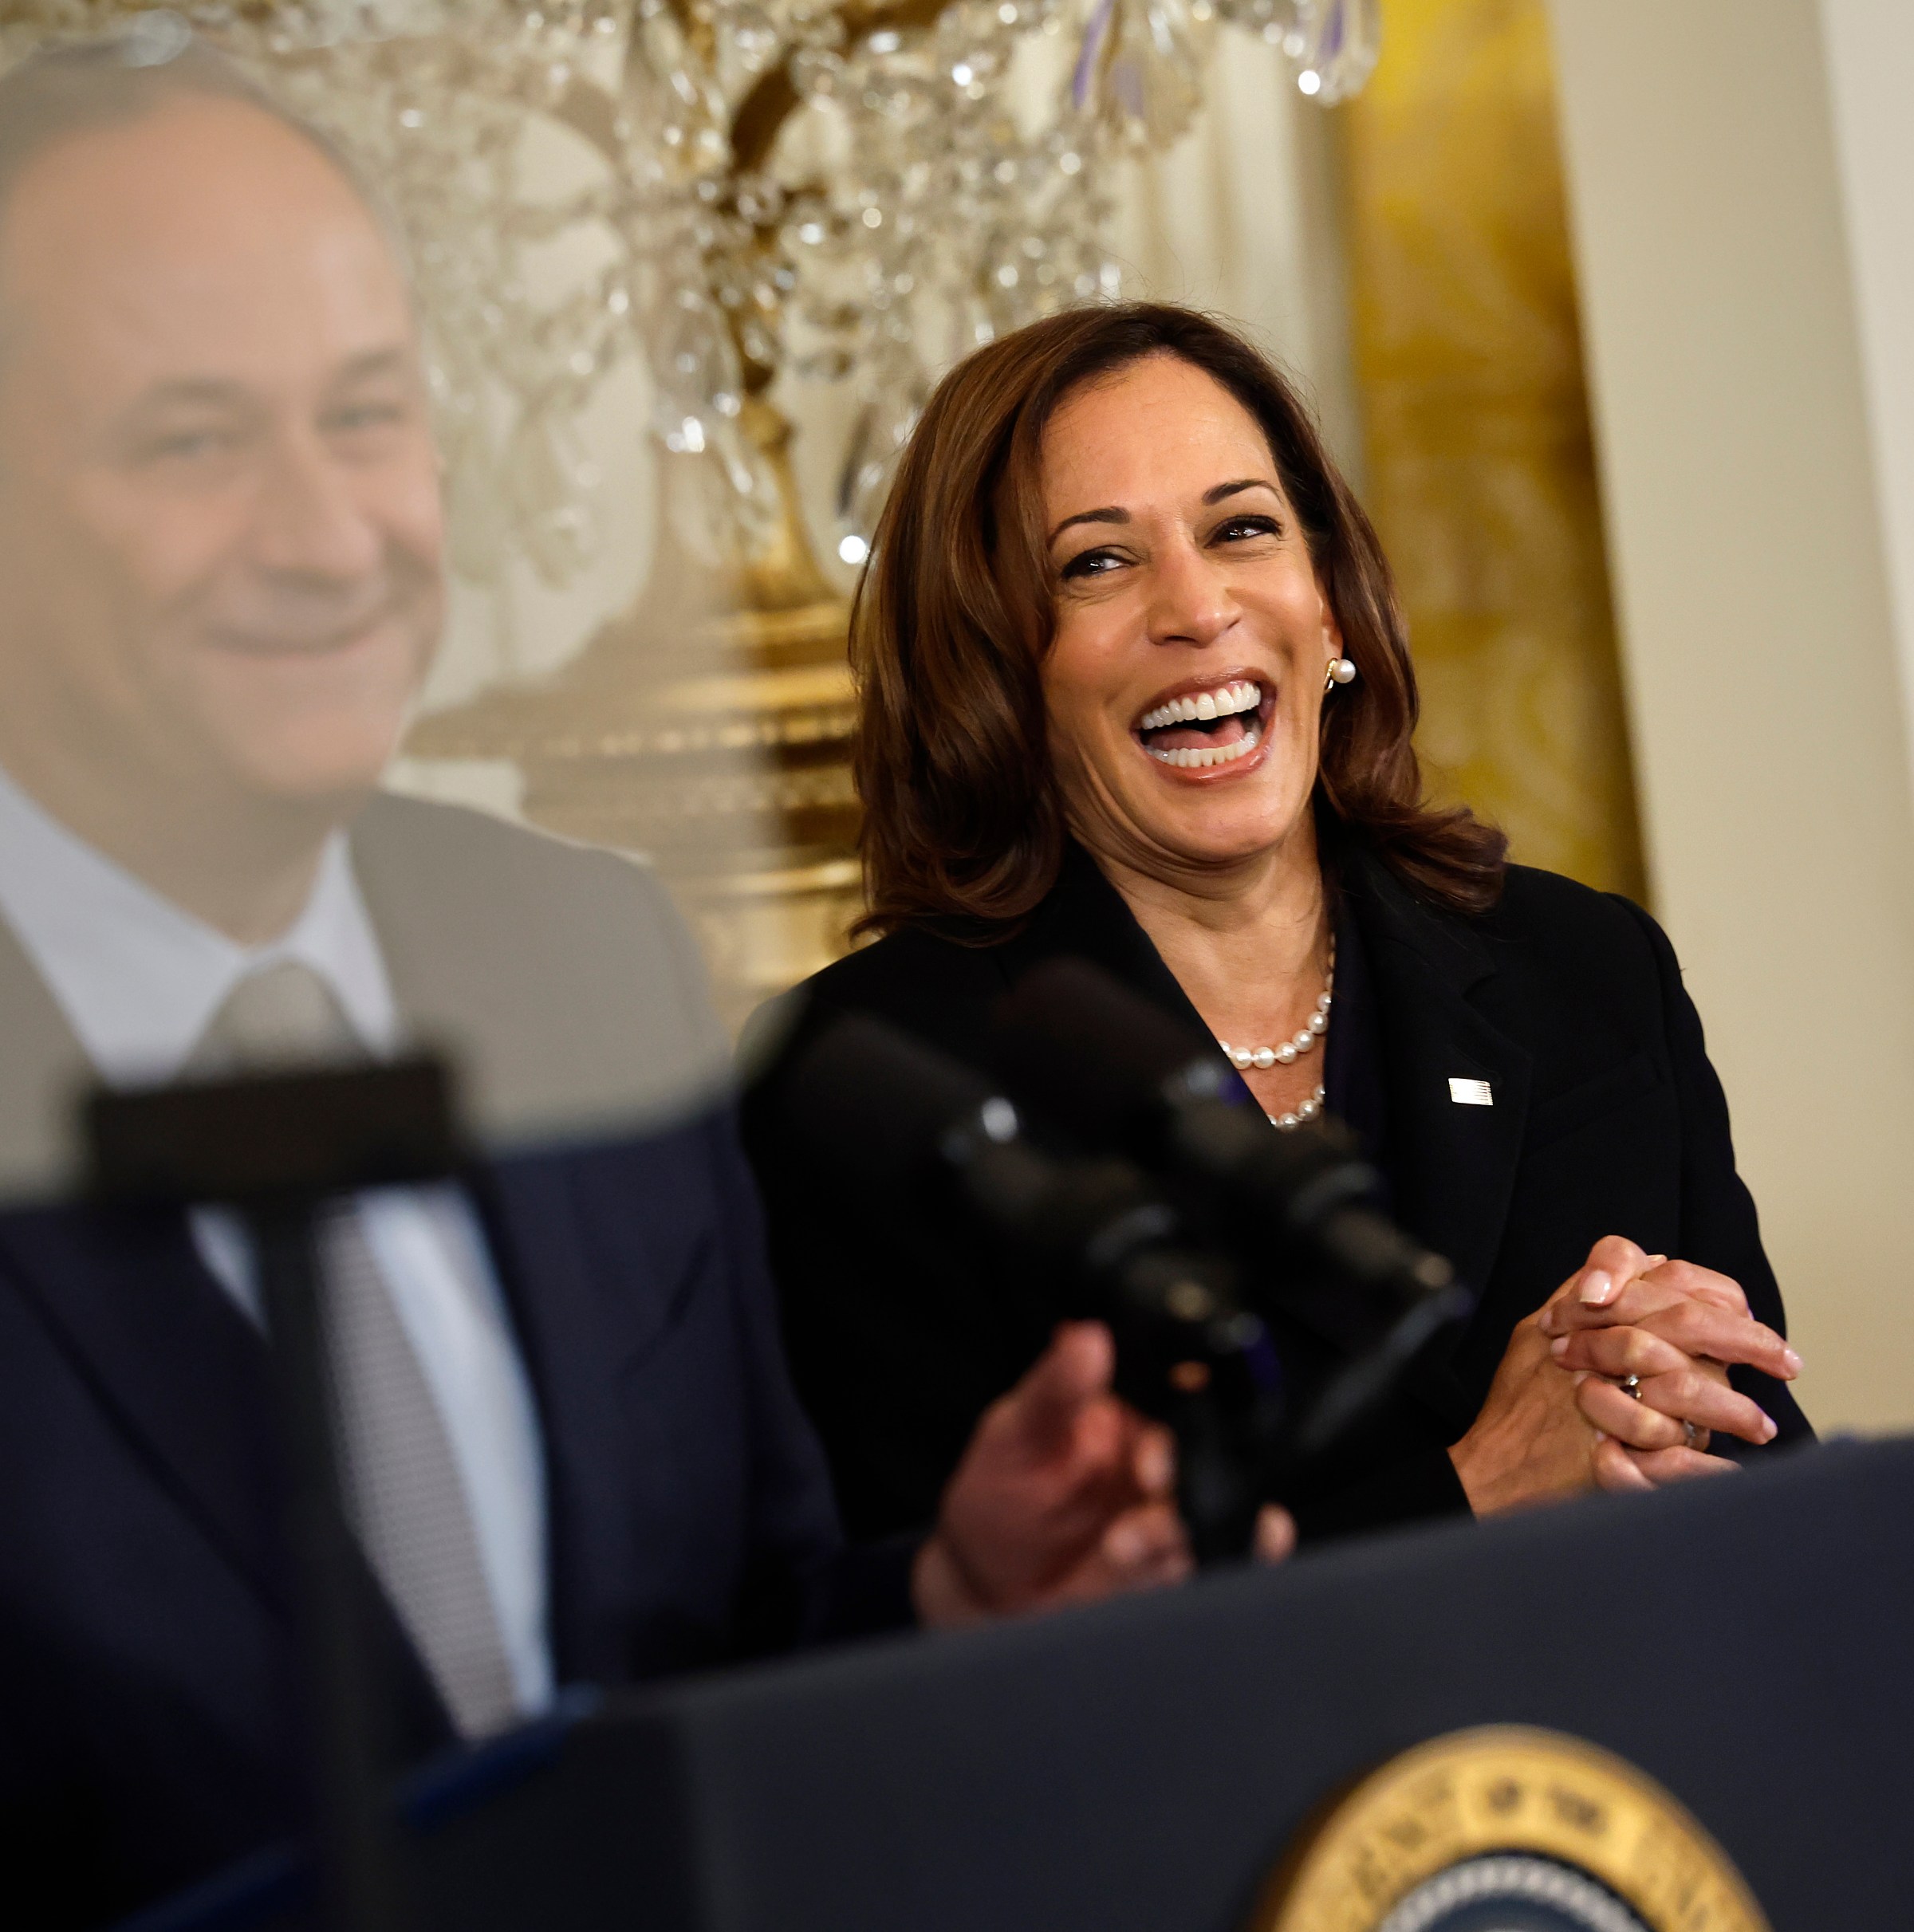 Why is everyone talking about Kamala Harris and coconut trees?